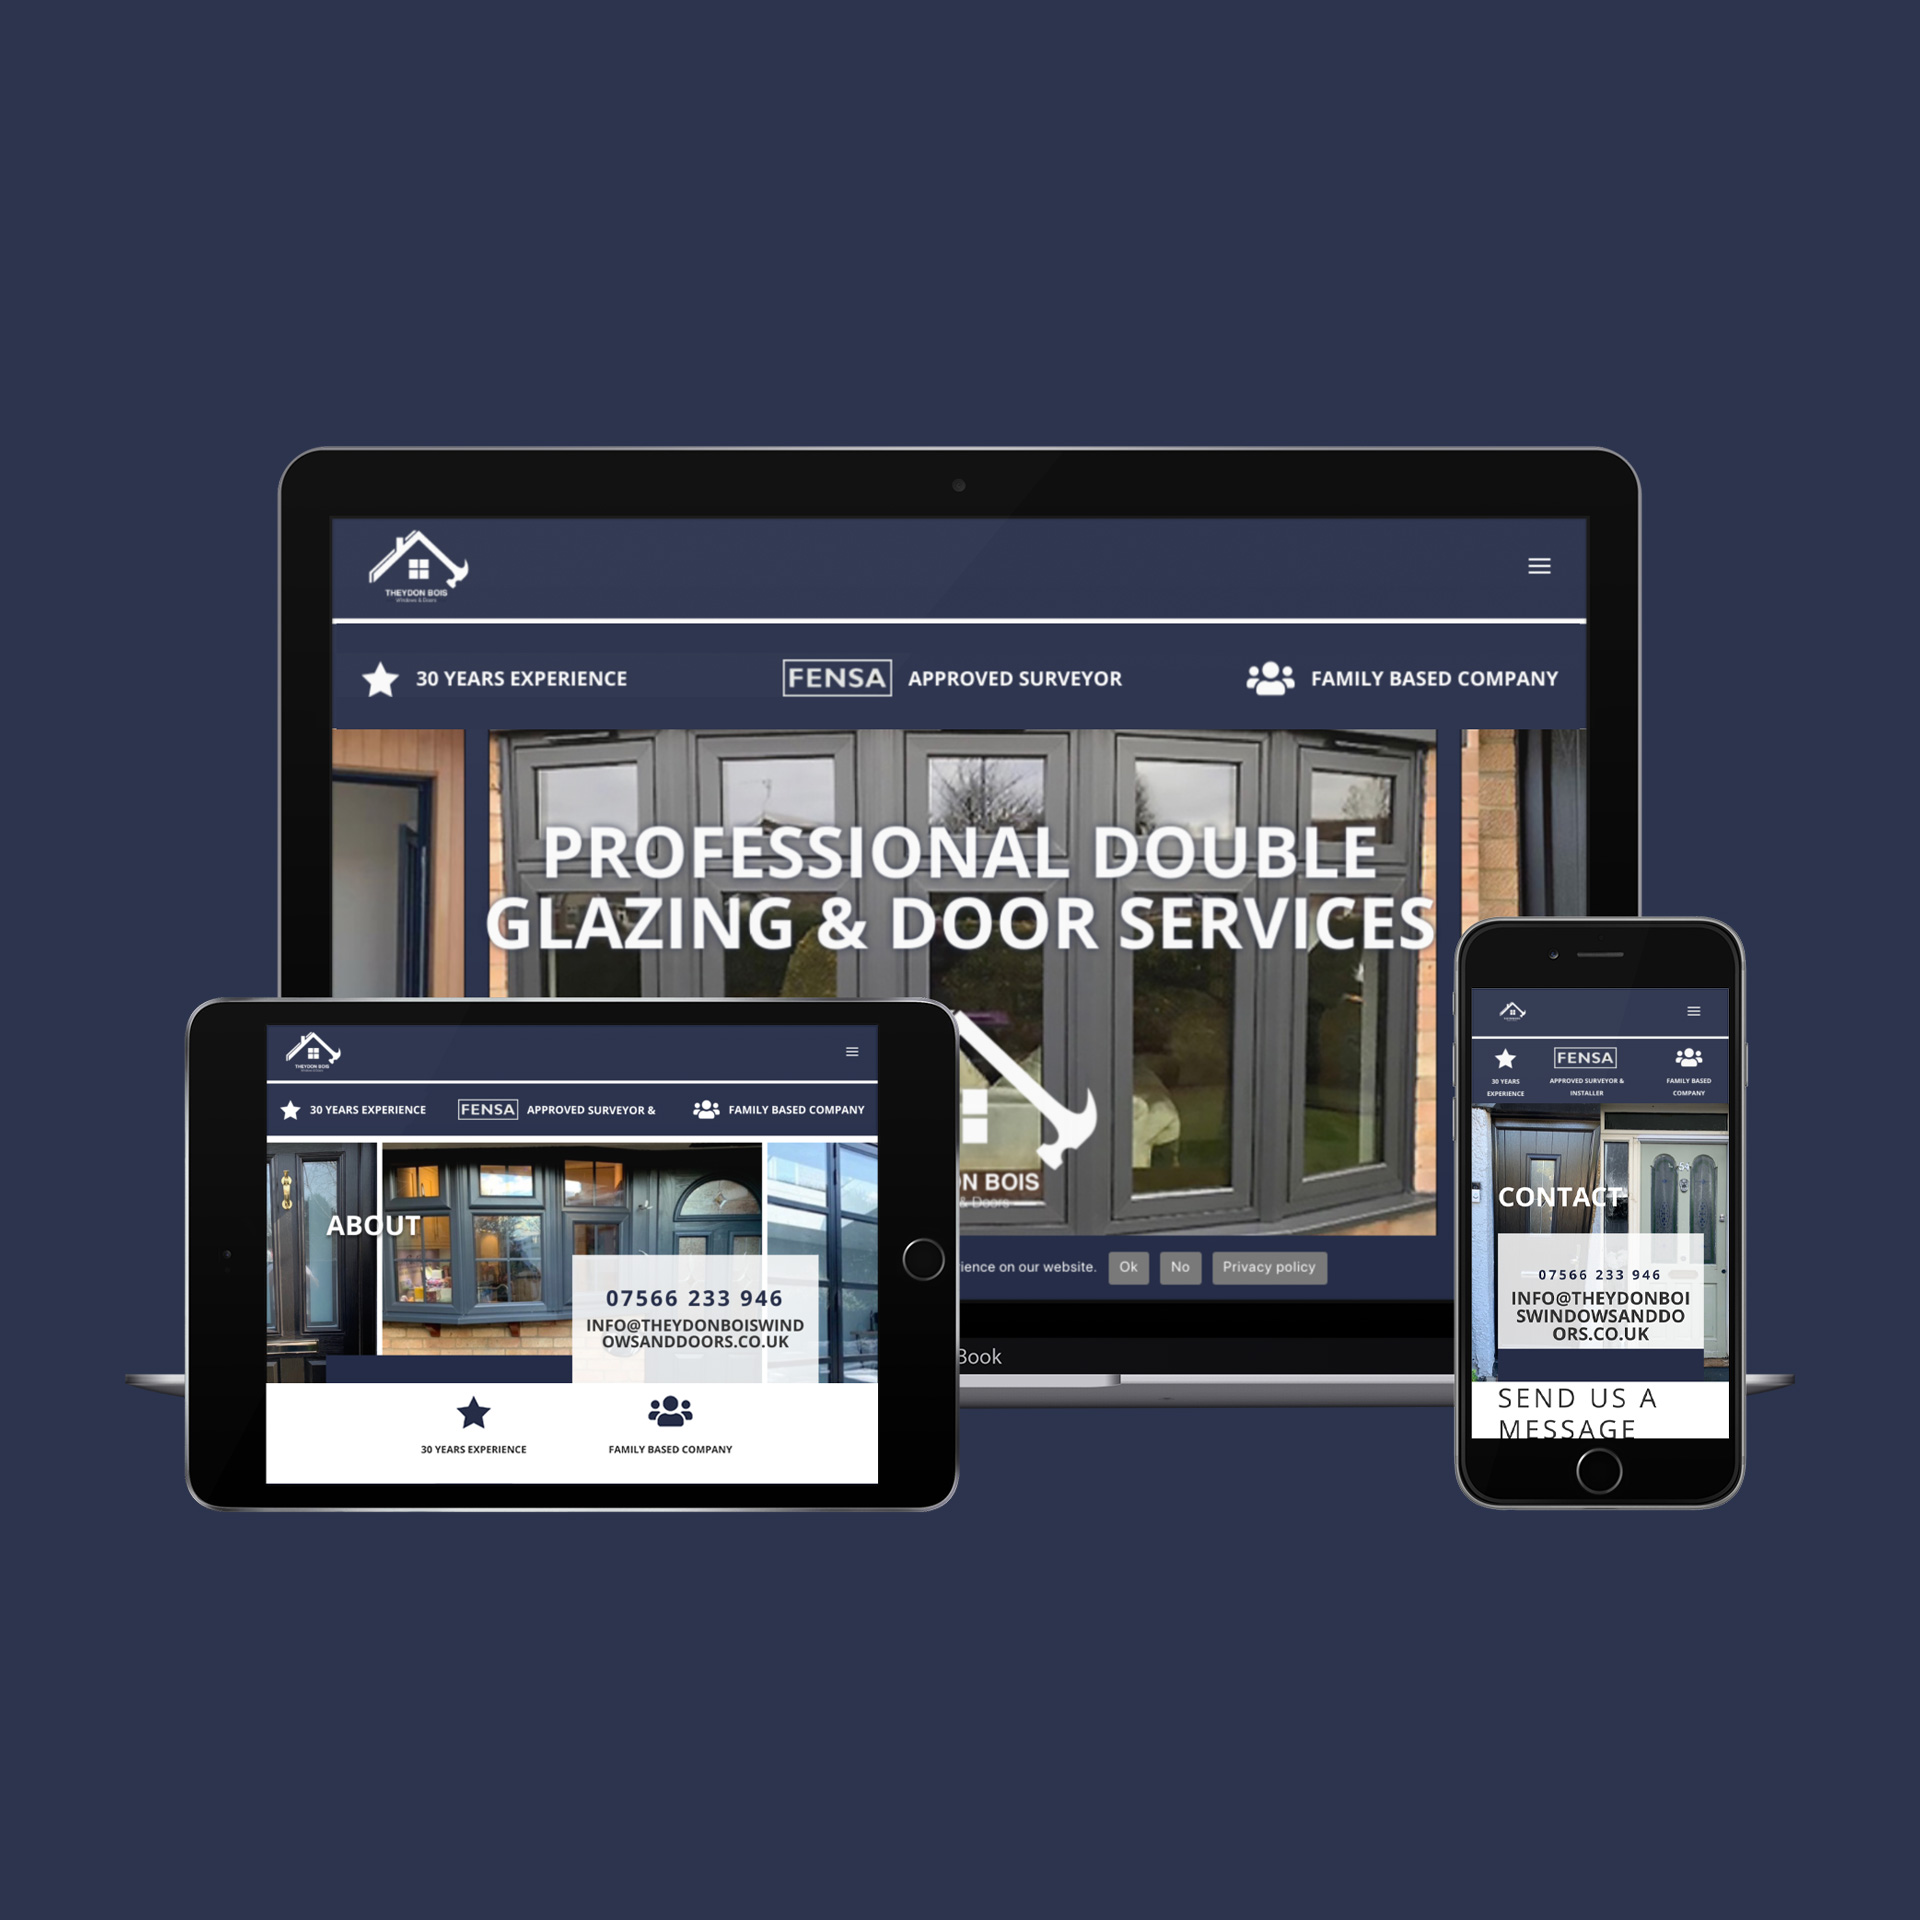 Theydon Bois Windows and Doors website on multiple devices